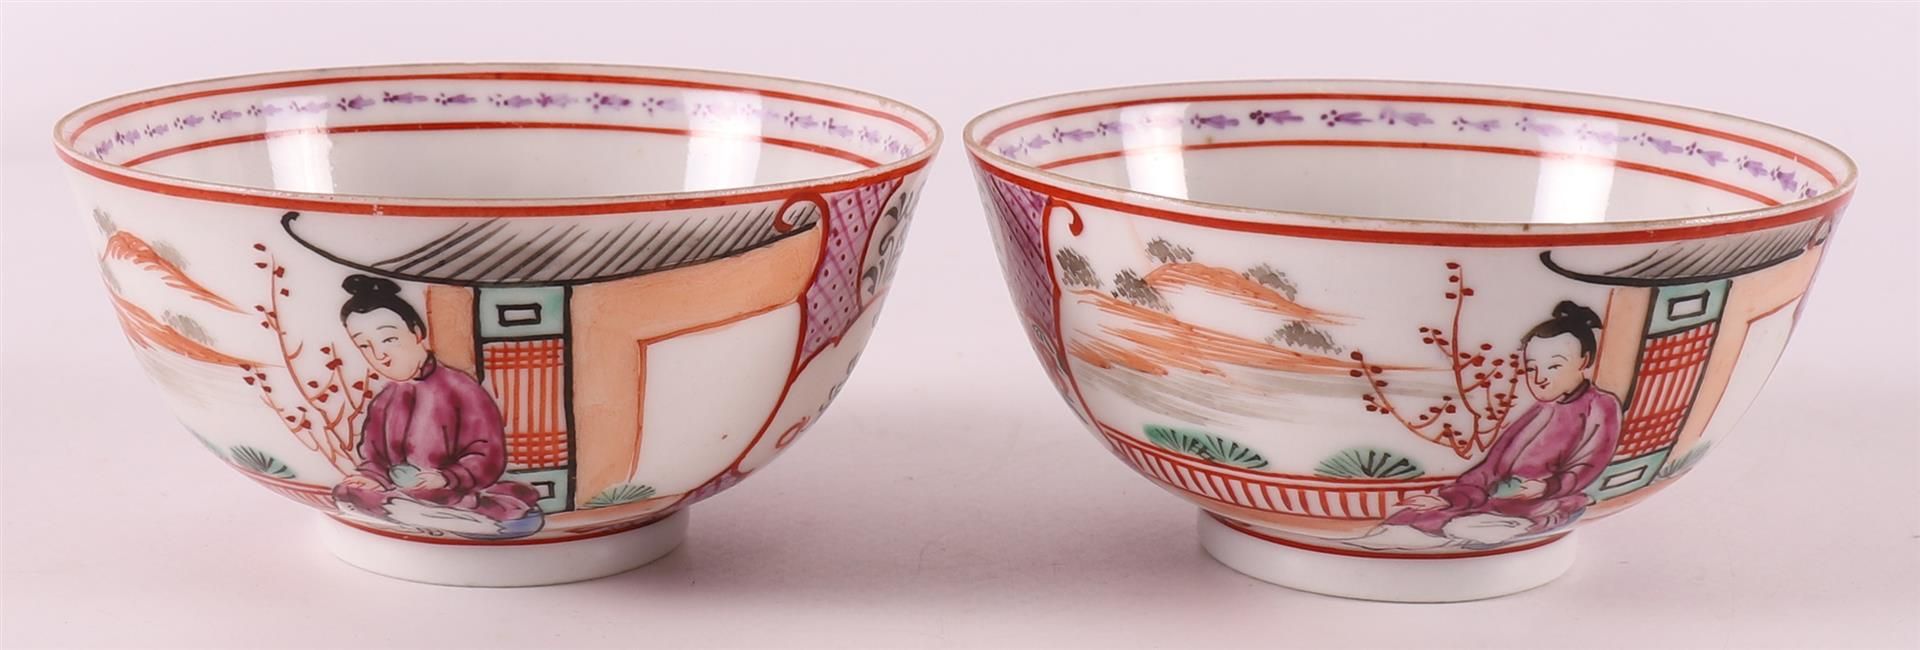 Two porcelain famille rose mandarin cups and saucers, 19th century. - Image 7 of 10